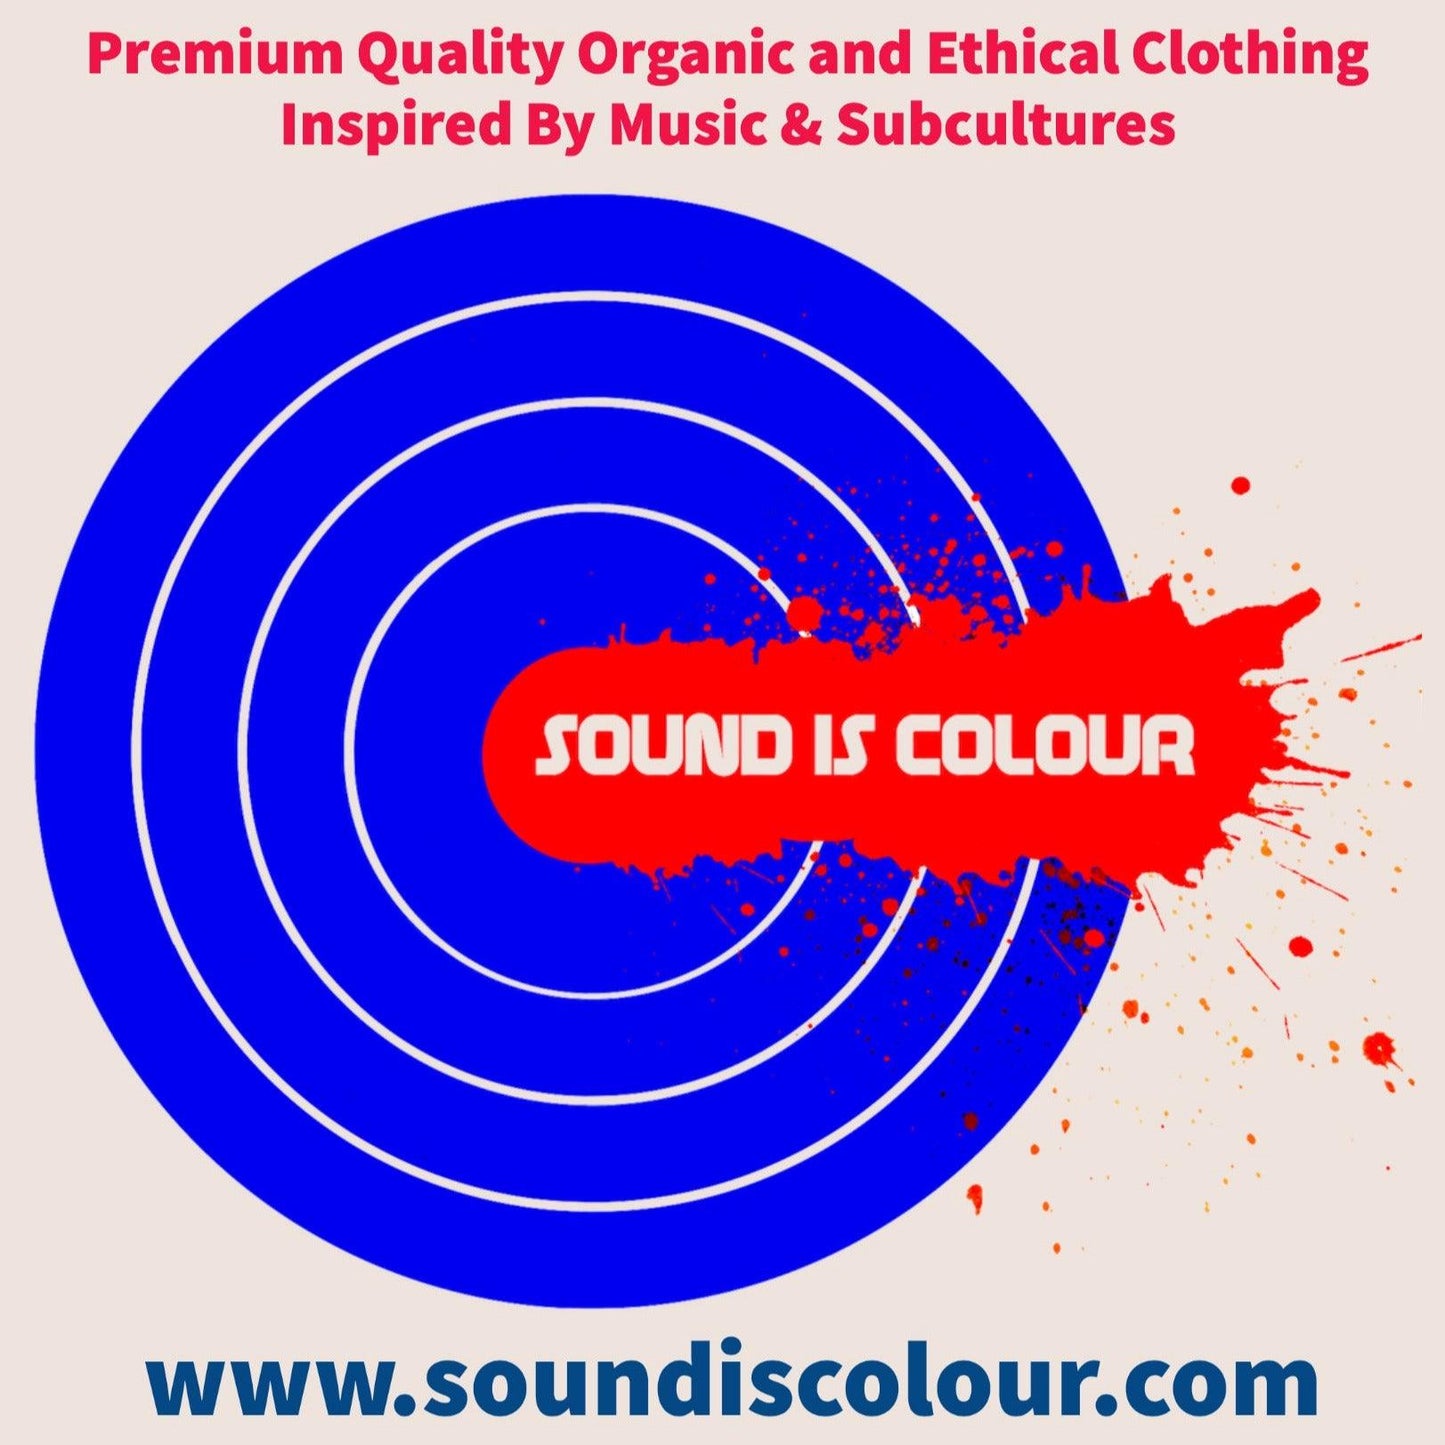 SOUND is COLOUR: Gift Card - SOUND IS COLOUR